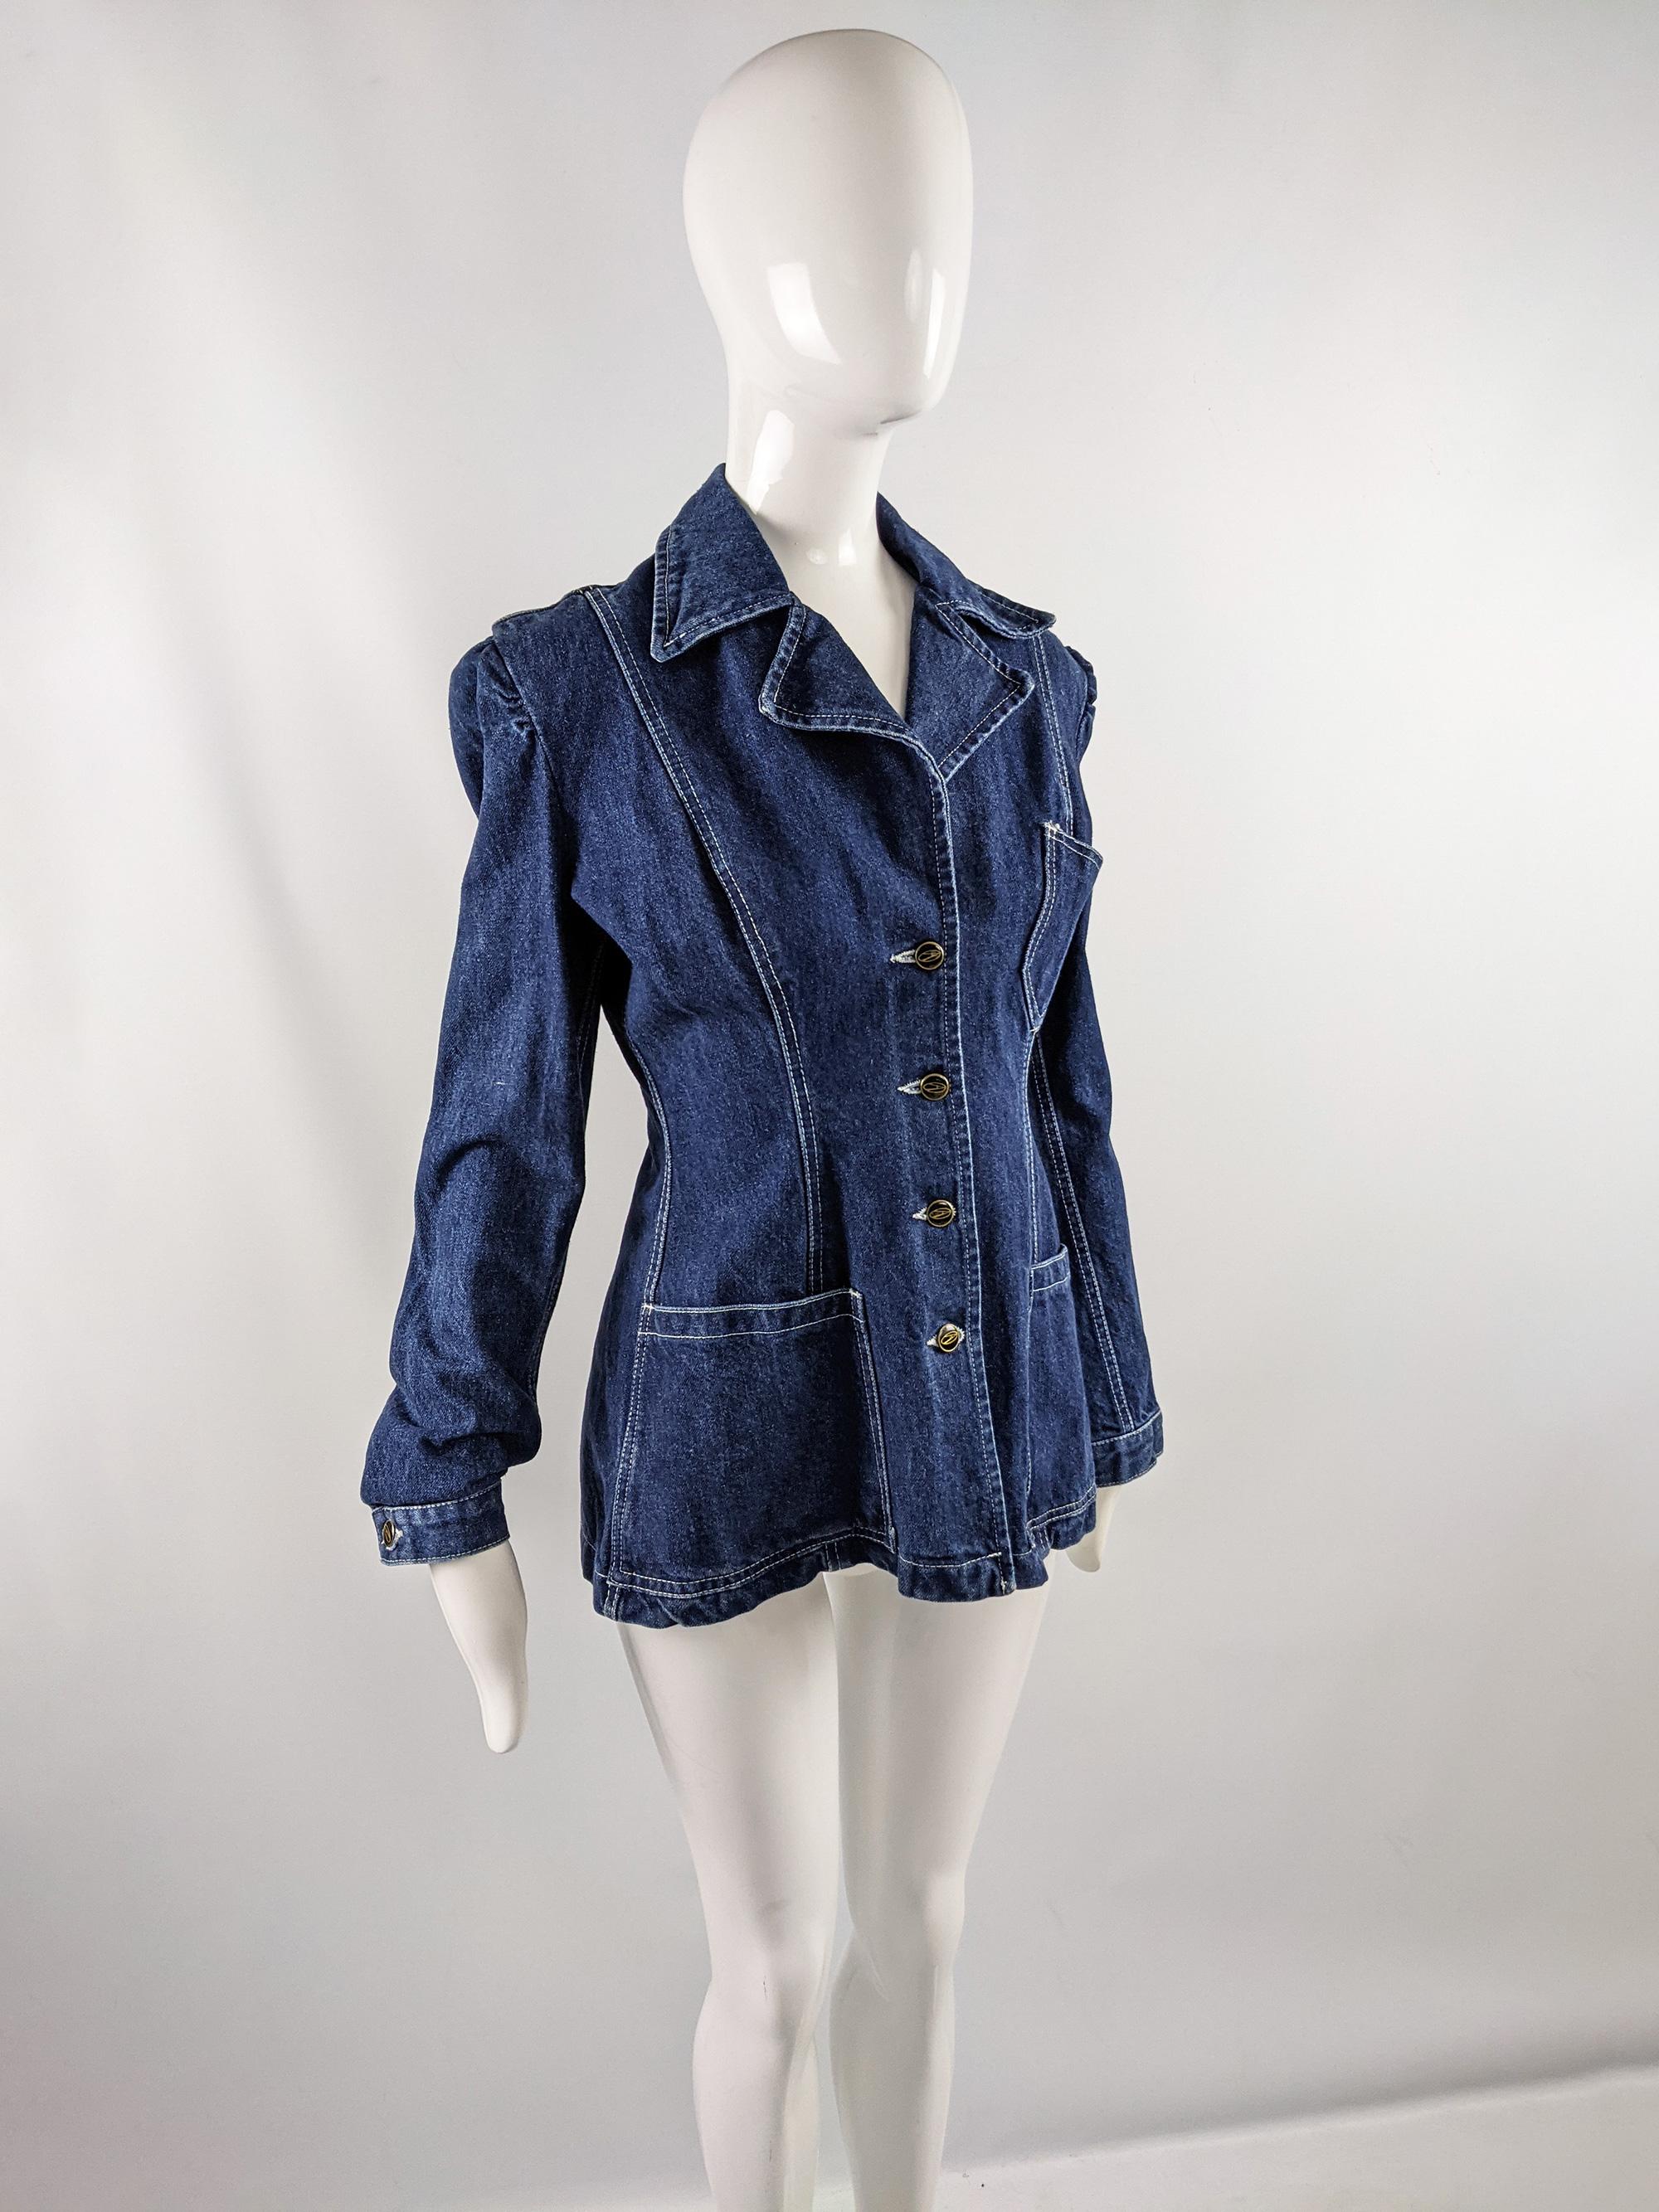 Destroy by John Richmond Vintage Womens Tailored Denim Jacket, 1990s In Excellent Condition For Sale In Doncaster, South Yorkshire